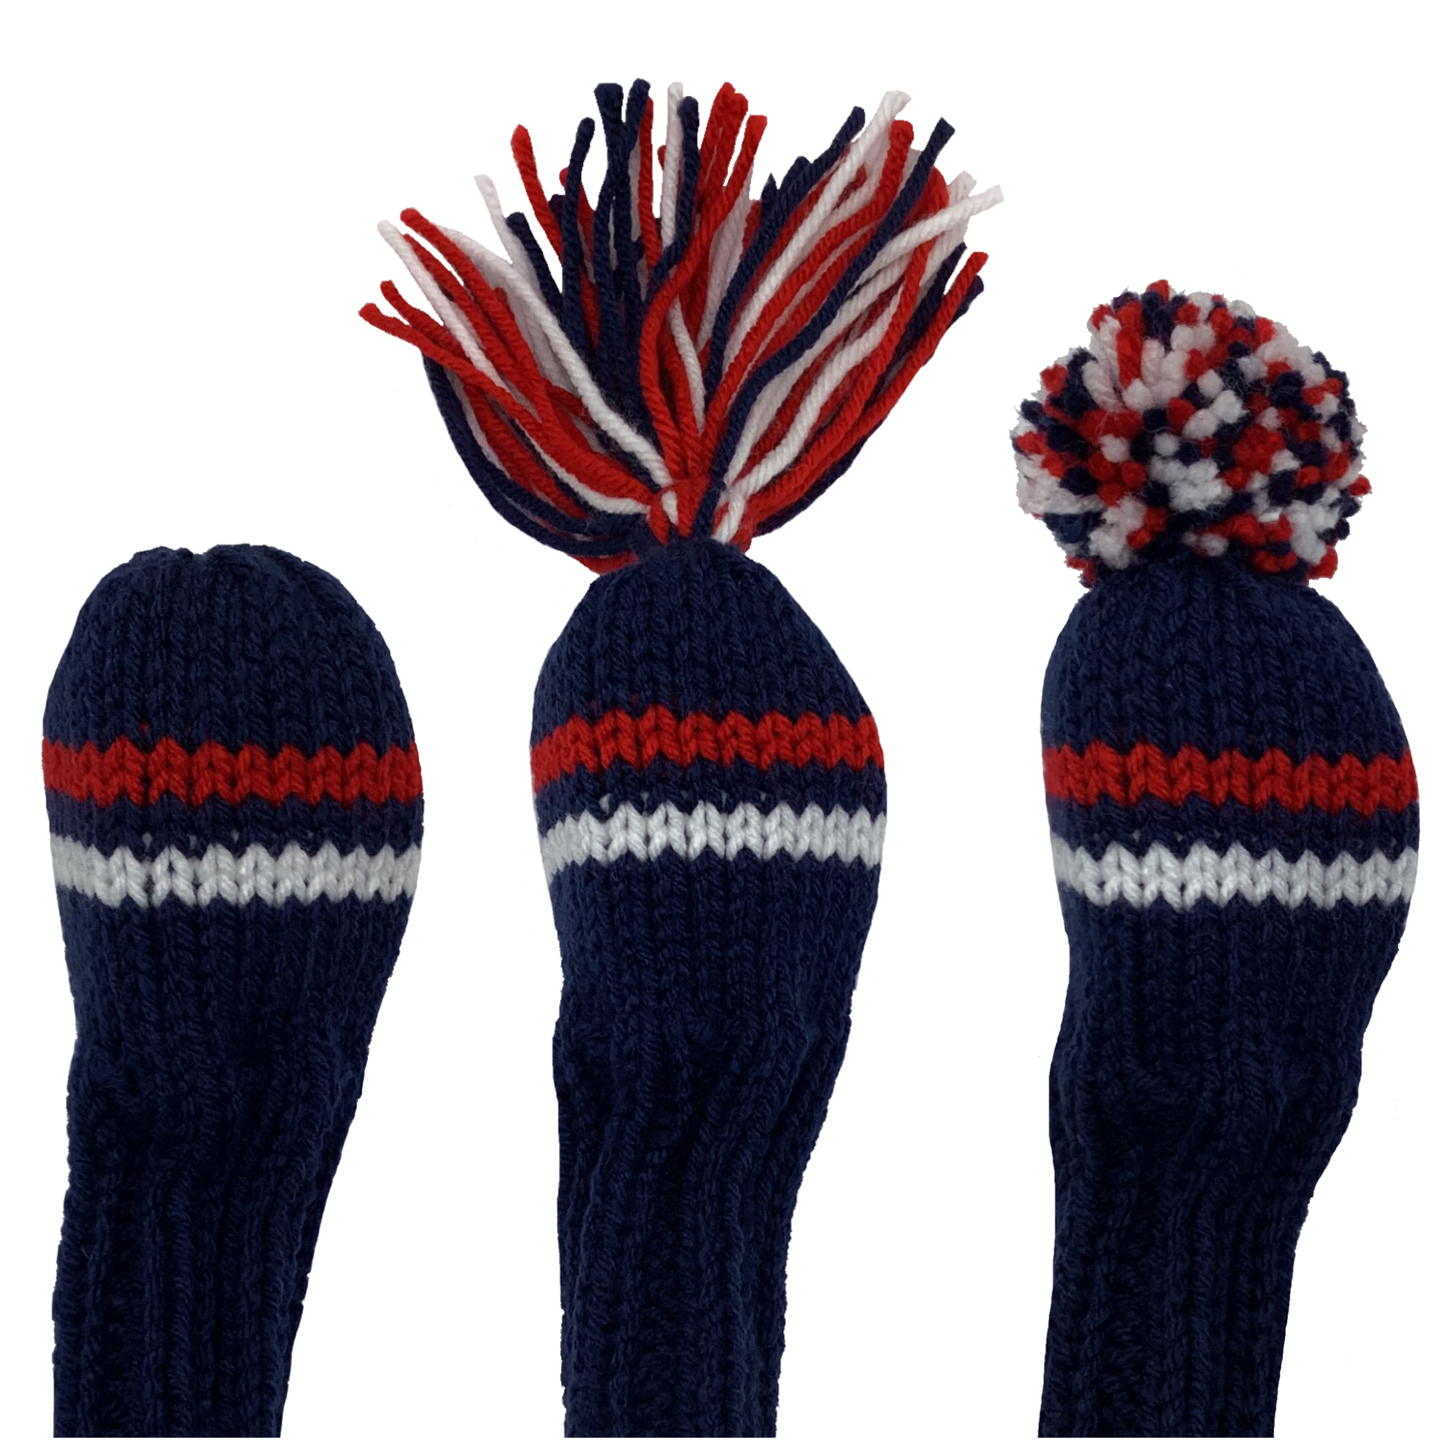 2 hybrid golf club knit headcover in navy blue with two stripes in alternating red and white and the option of adding a red, navy and white tassel or pom-pom.